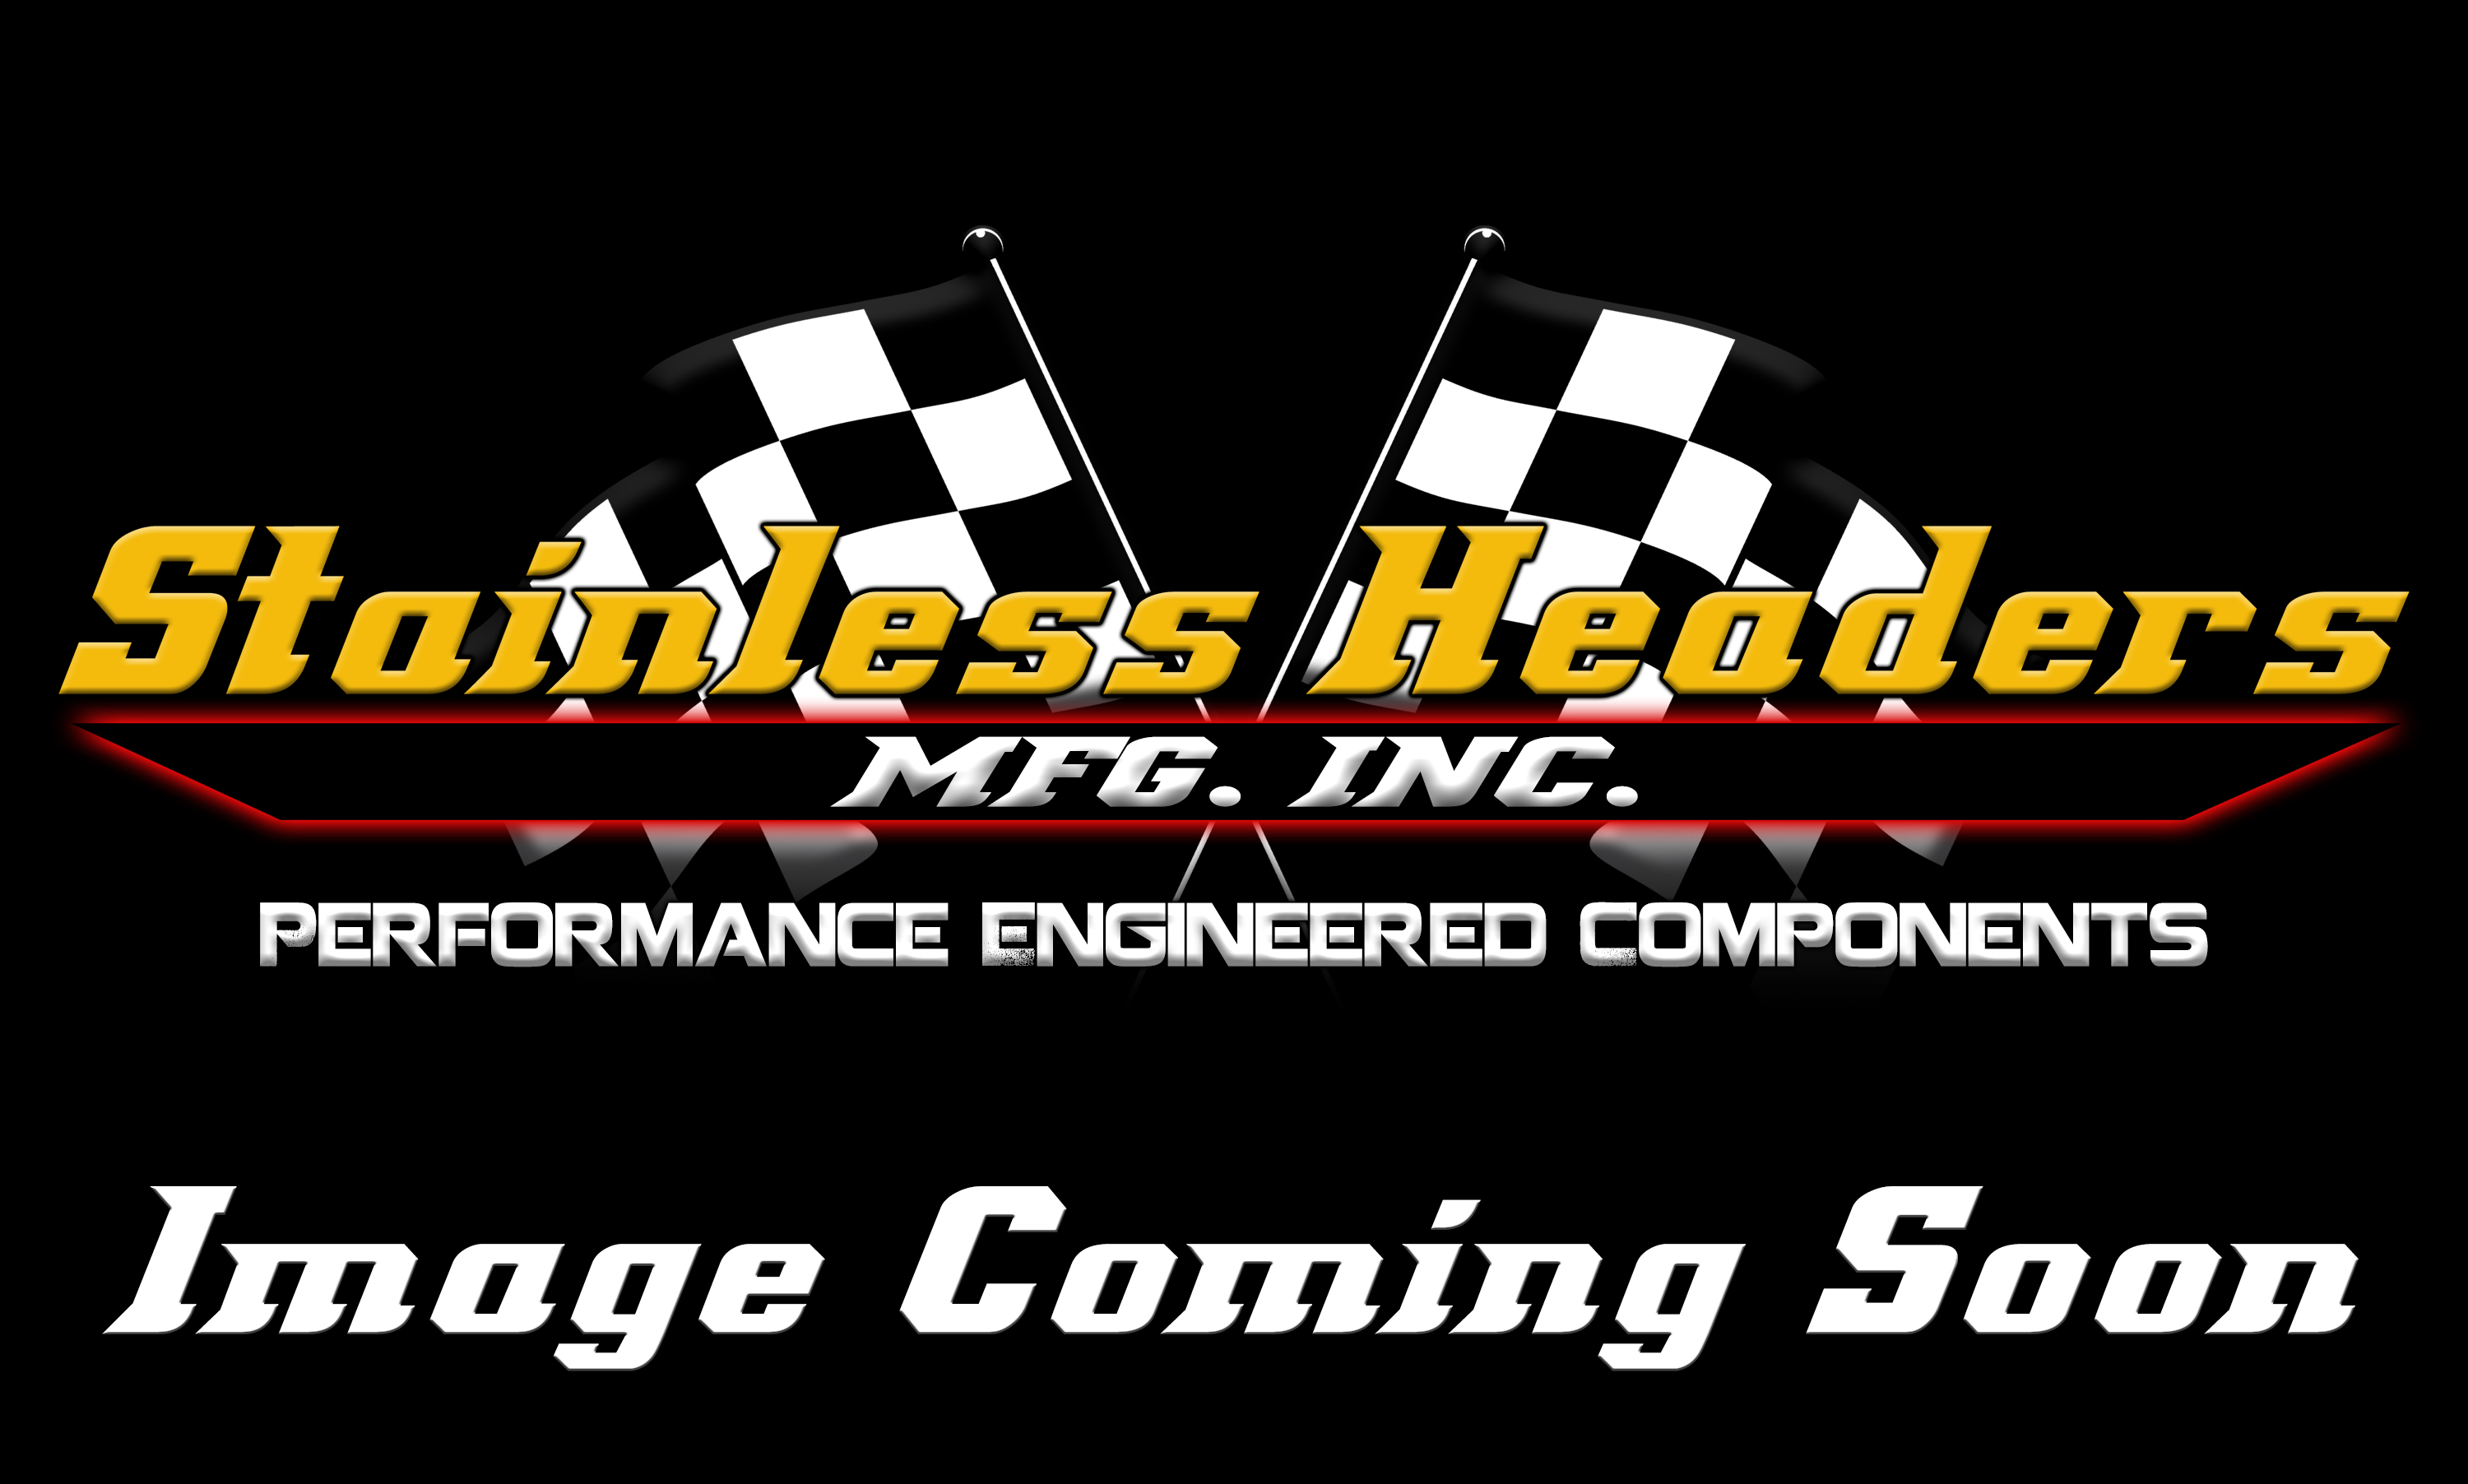 Stainless Headers - 1 5/8" Primary 4 into 1 Performance Merge Collector-16ga 304ss - Image 3